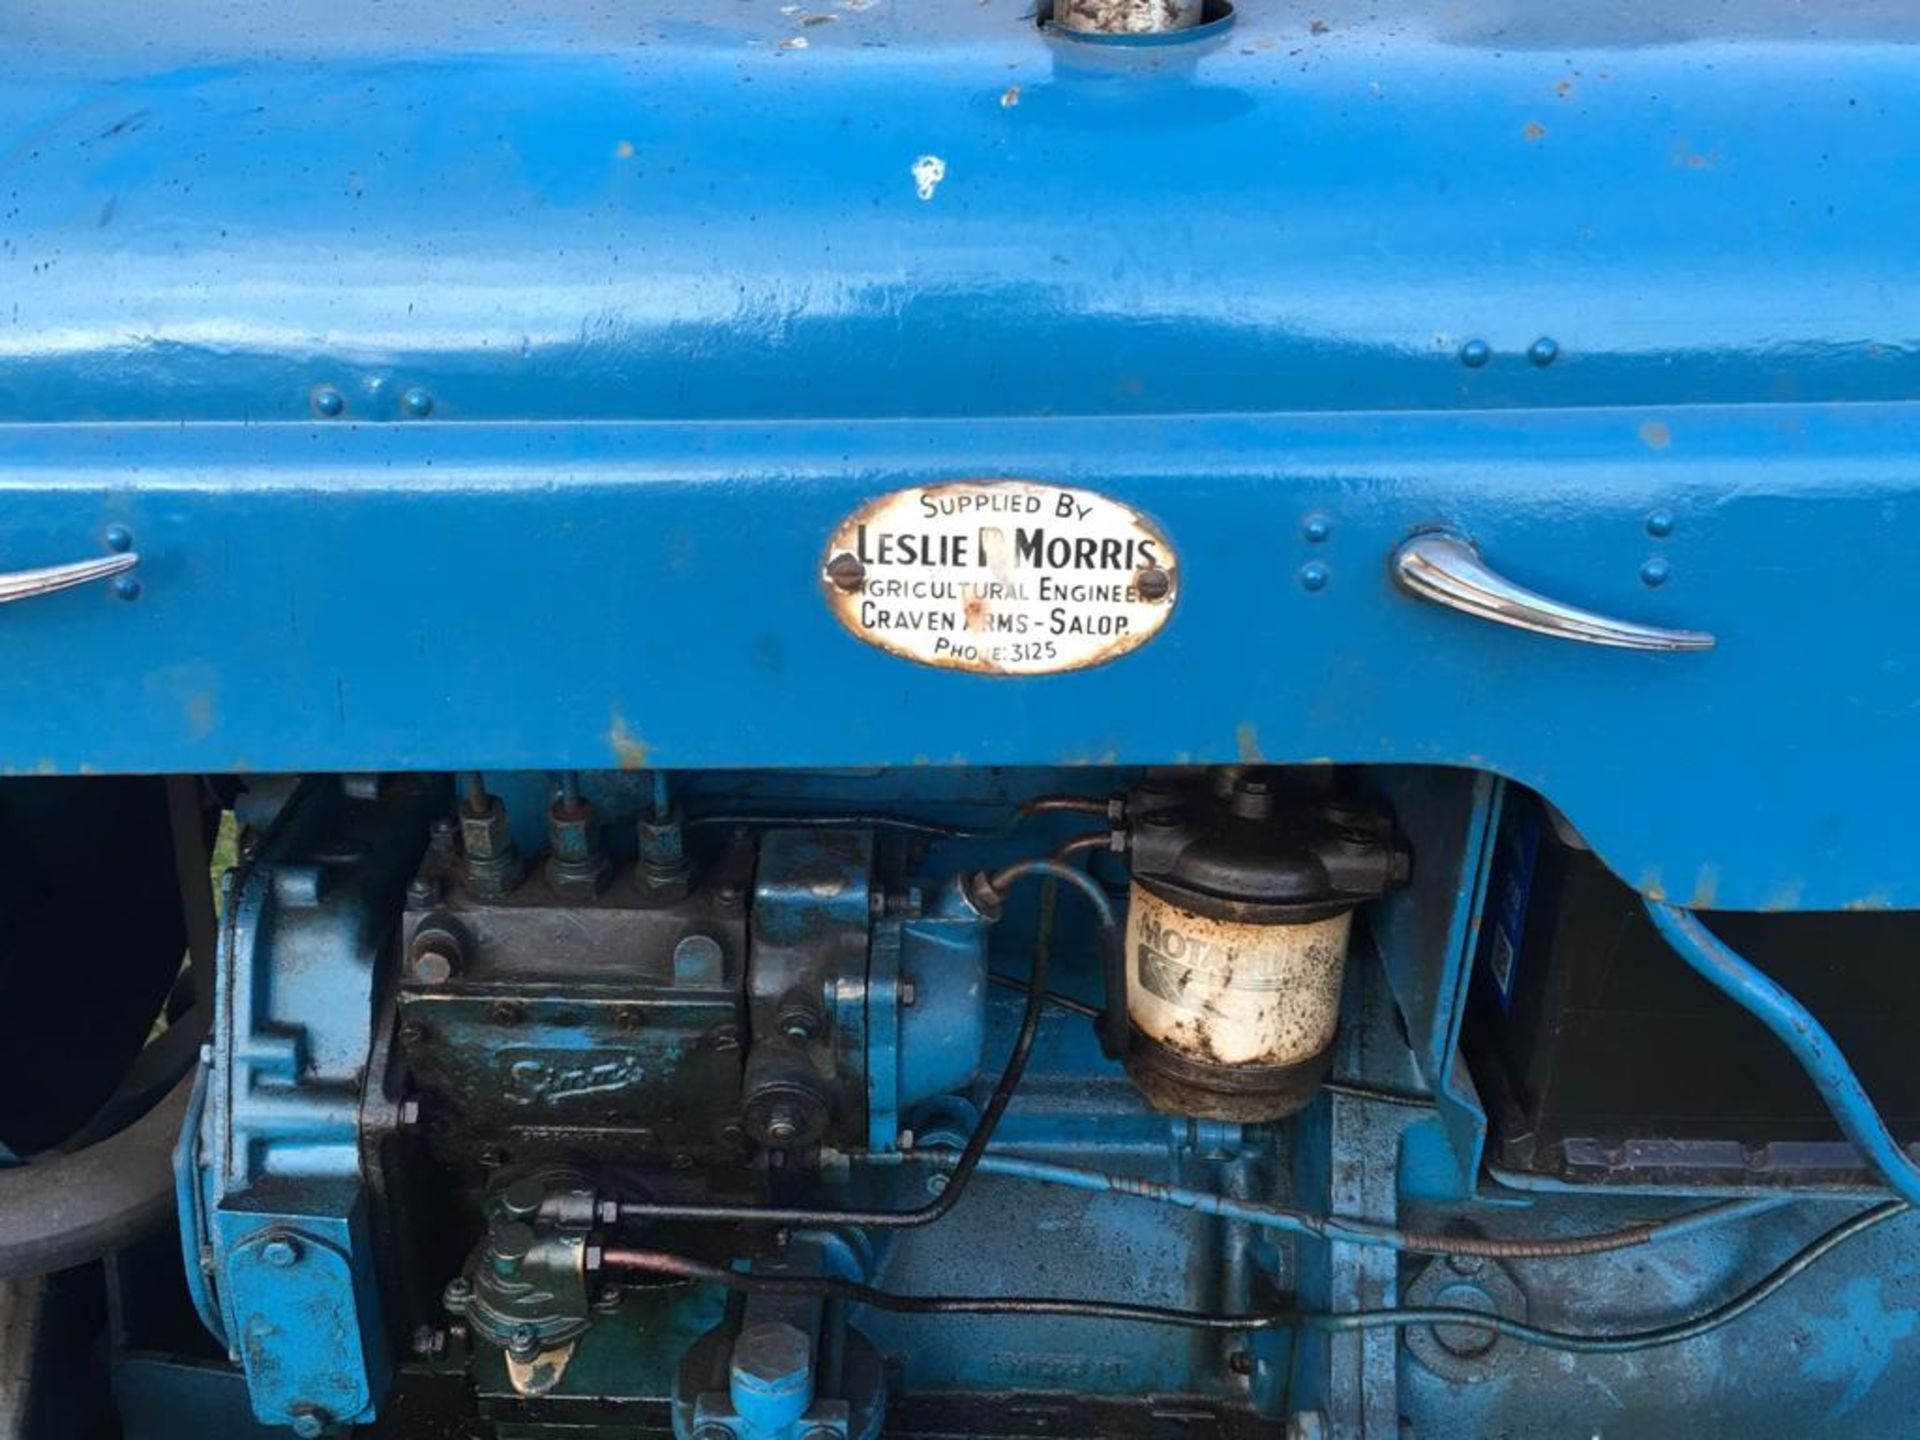 Ford Dexter Tractor - Image 14 of 17